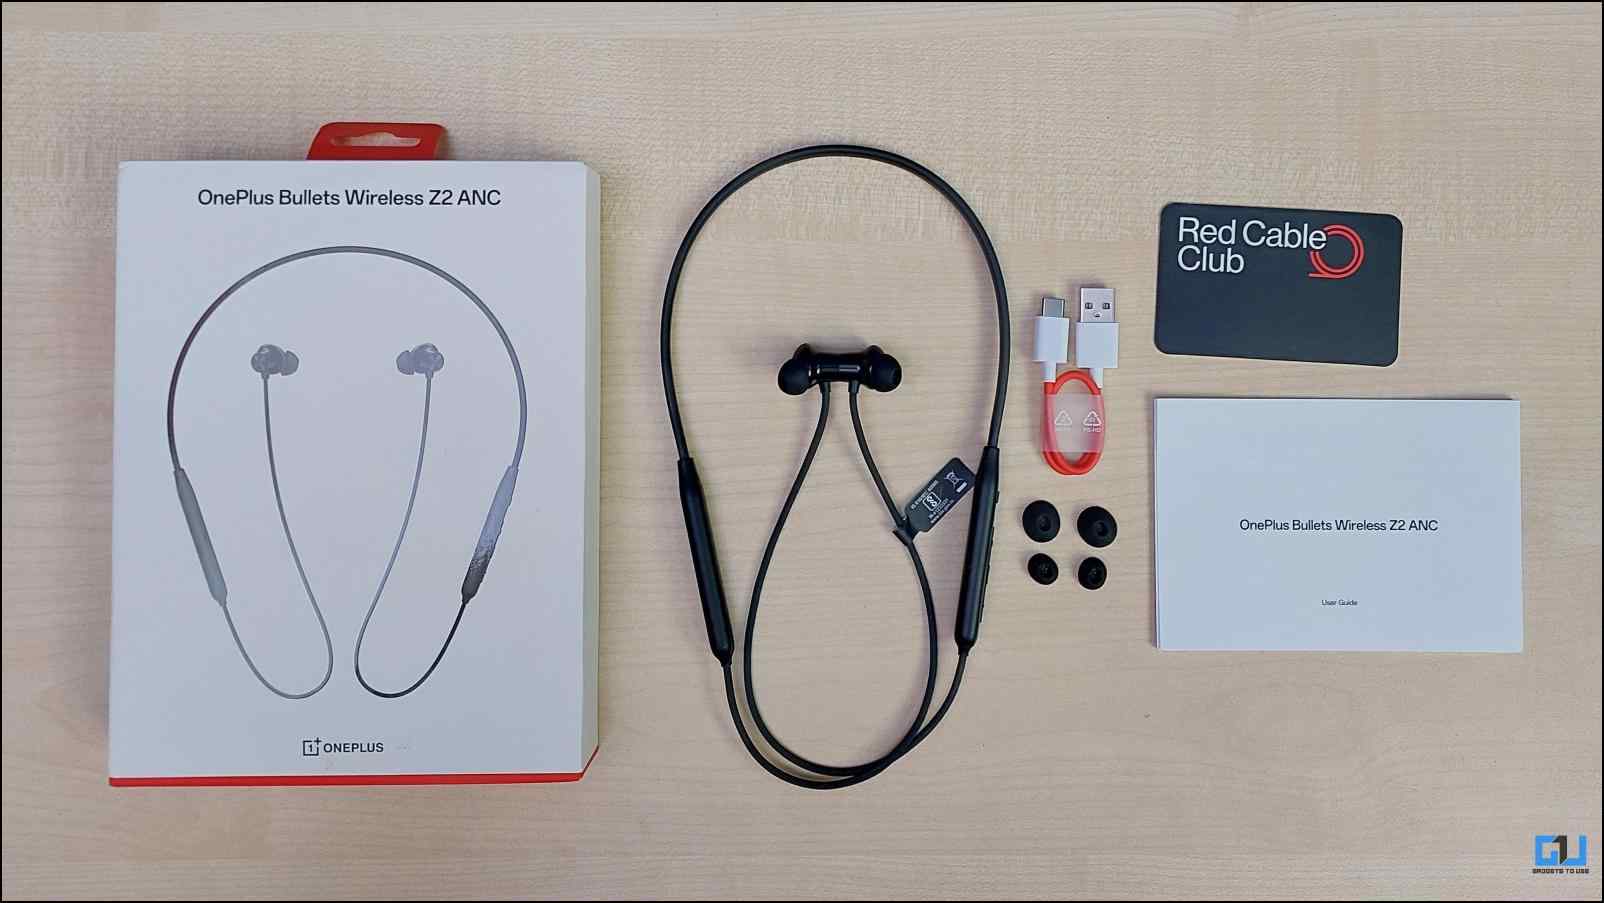 OnePlus-Bullets-Wireless-Z2-ANC-Box-Contents